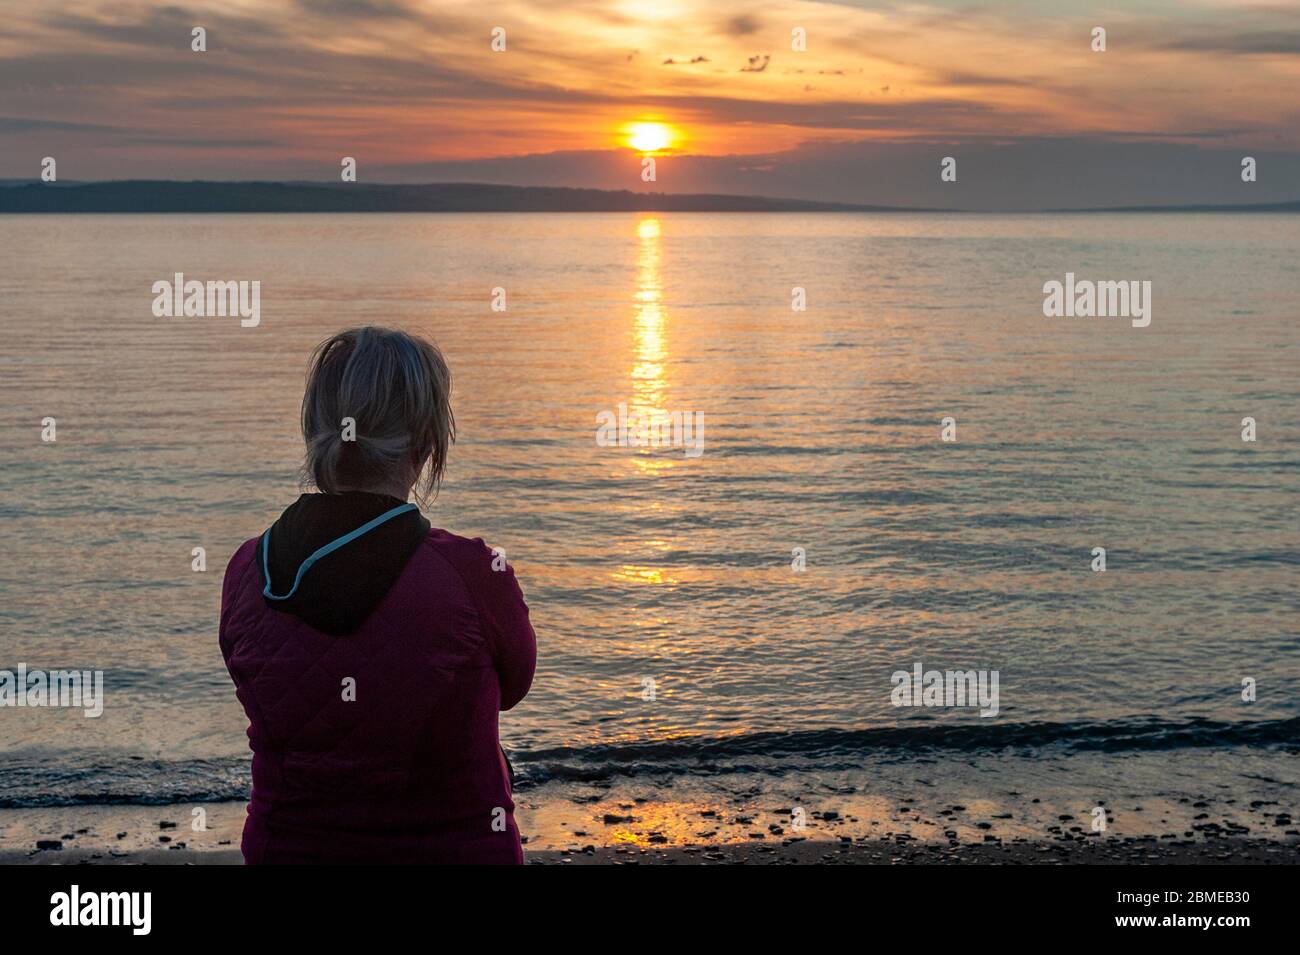 Courtmacsherry, West Cork, Ireland. 9th May, 2020. Due to the Covid-19 Lockdown, Pieta House had to cancel its Darkness into Light walk this year. However, Pieta House urged people to view the sunrise to raise money for the charity. A woman watches the sun rise at Broadstrand Beach. Credit: AG News/Alamy Live News Stock Photo